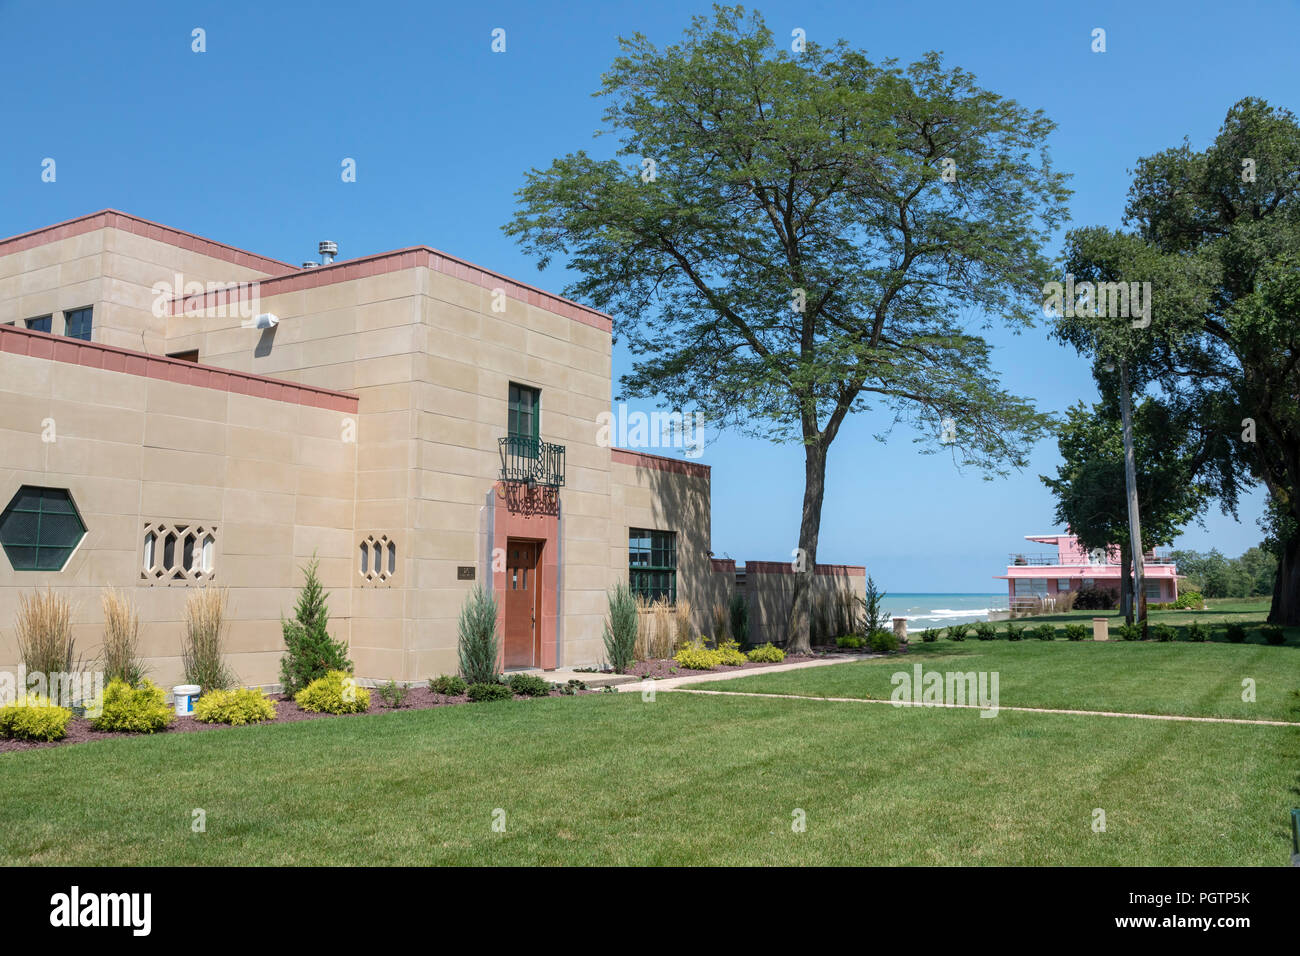 Beverly Shores, Indiana - The Century of Progress Historic District in Indiana Dunes National Lakeshore, at the southern end of Lake Michigan. The fiv Stock Photo